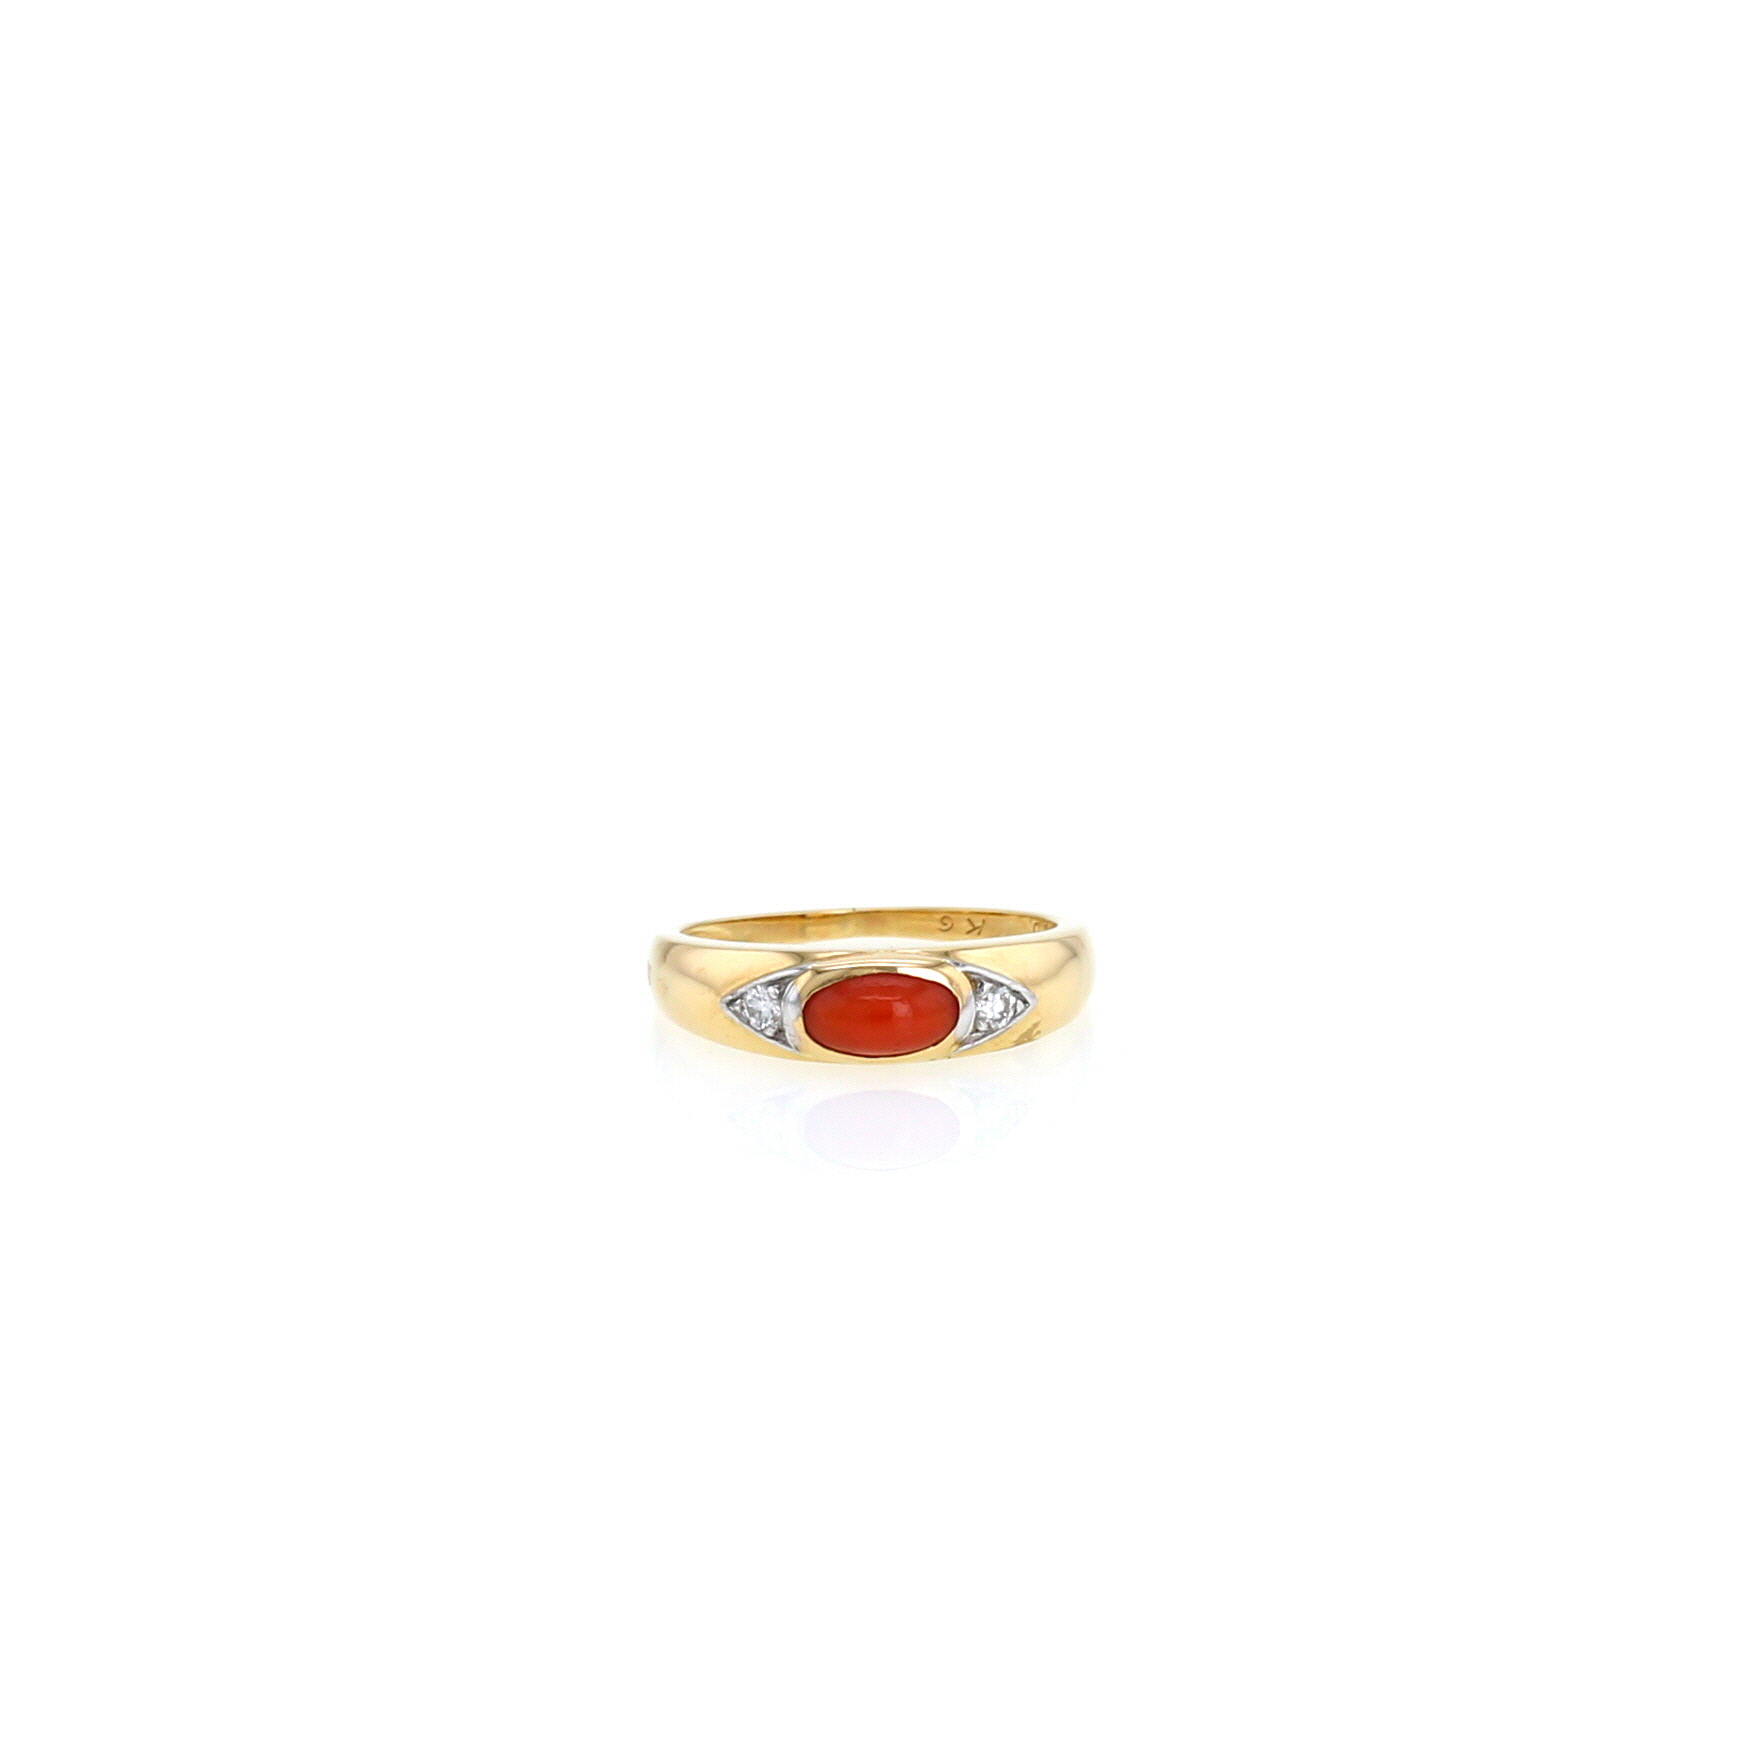 Ring In Yellow , Platinum, Coral And Diamonds